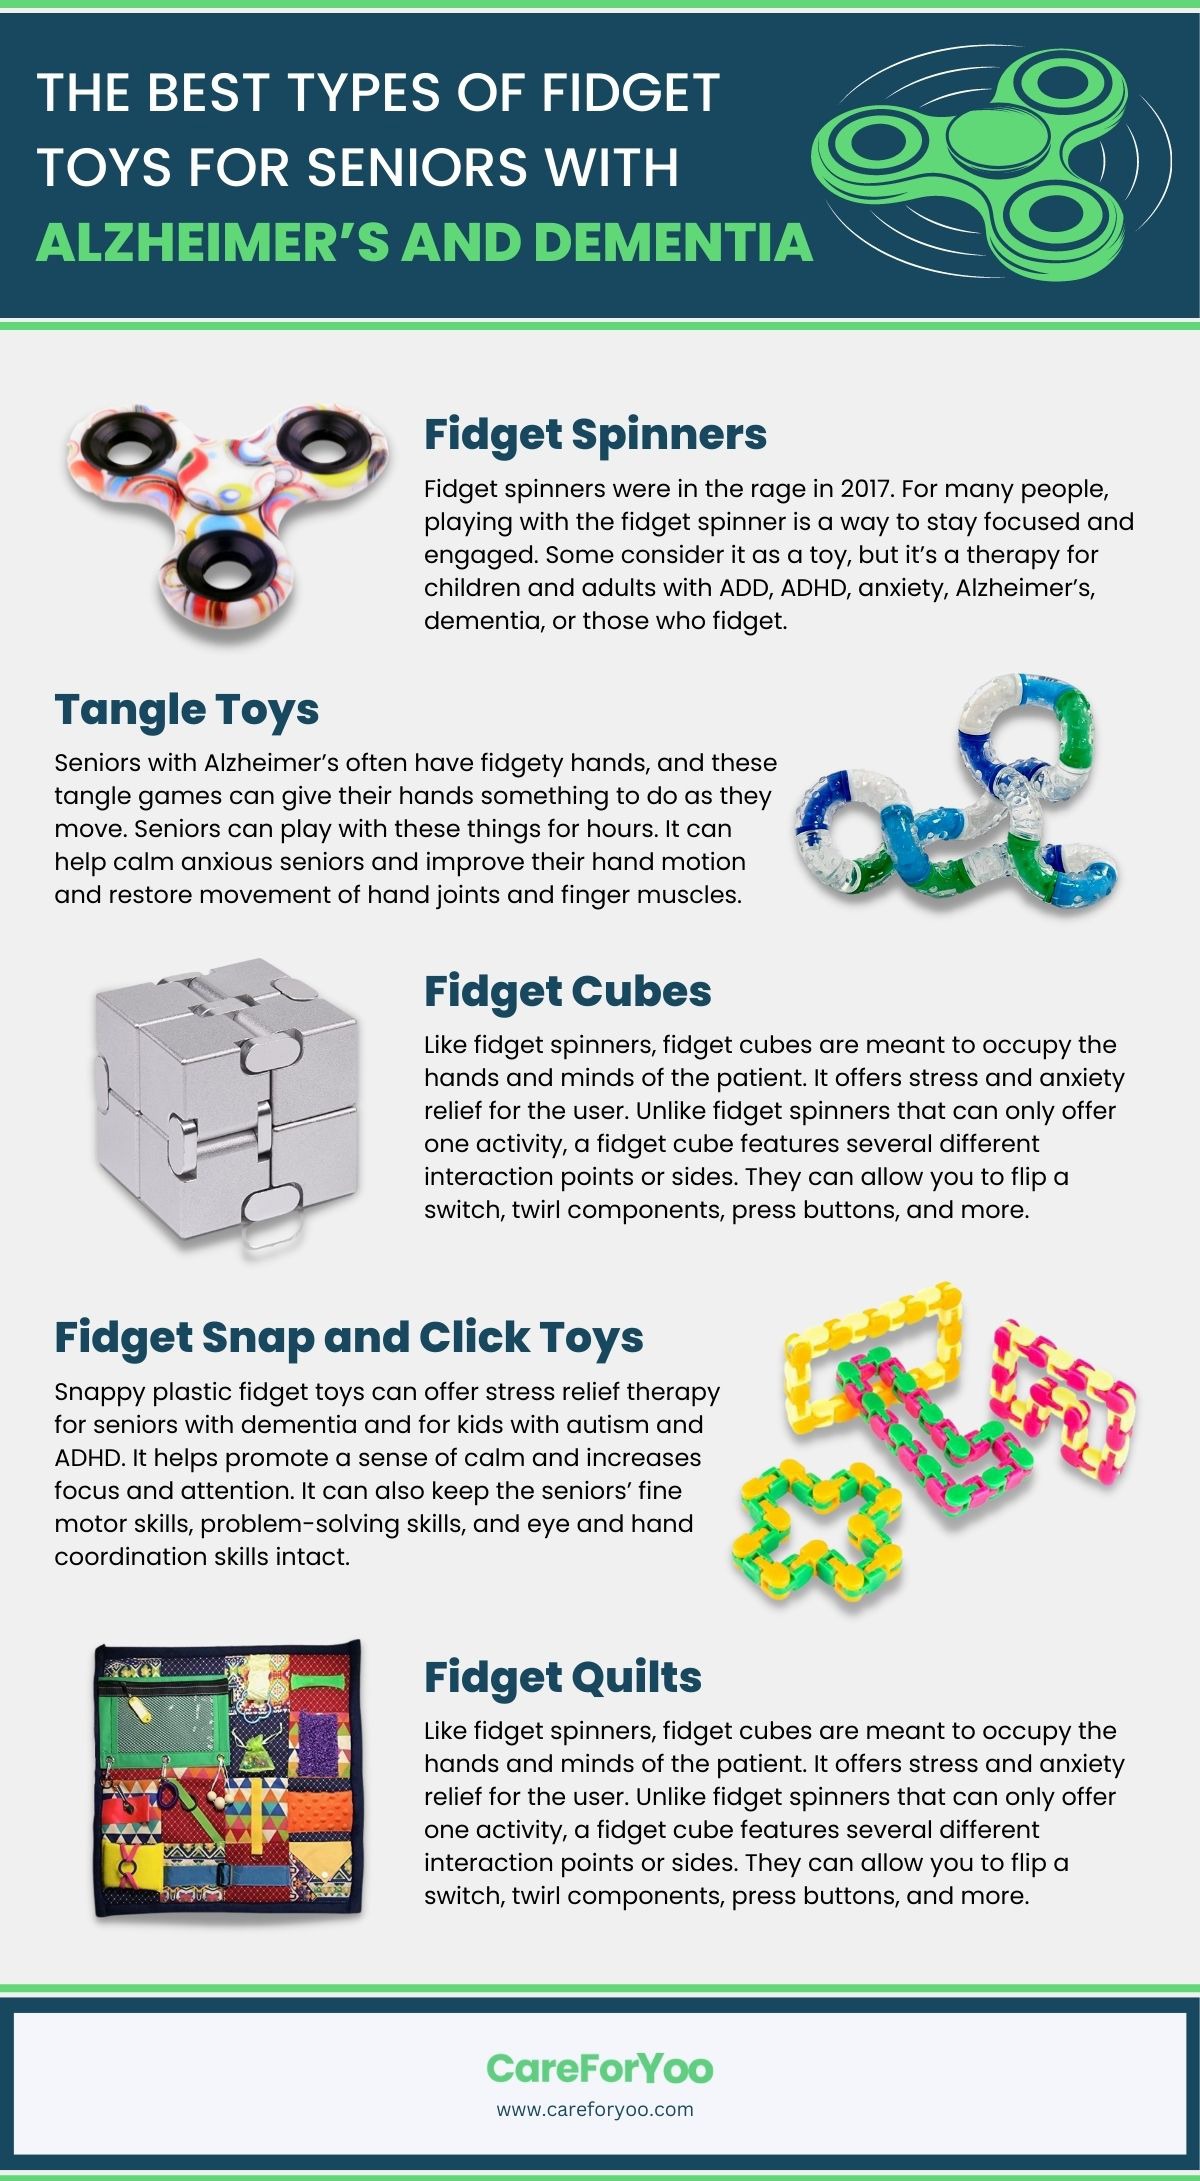 The Best Types of Fidget Toys for Seniors with Alzheimer’s and Dementia